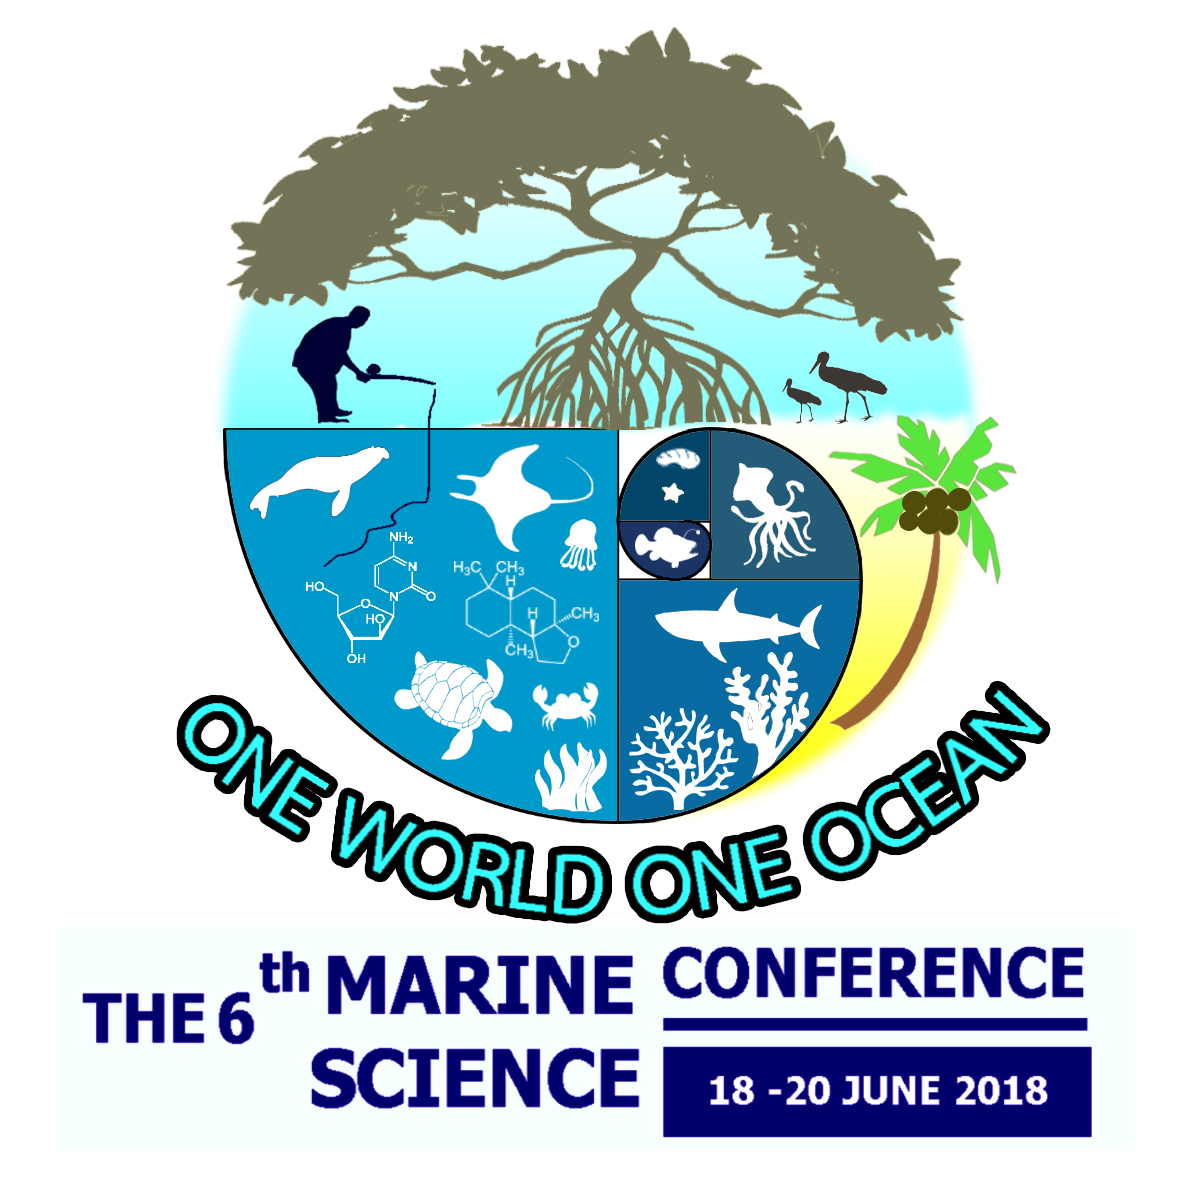 The 6th Marine Science Conference